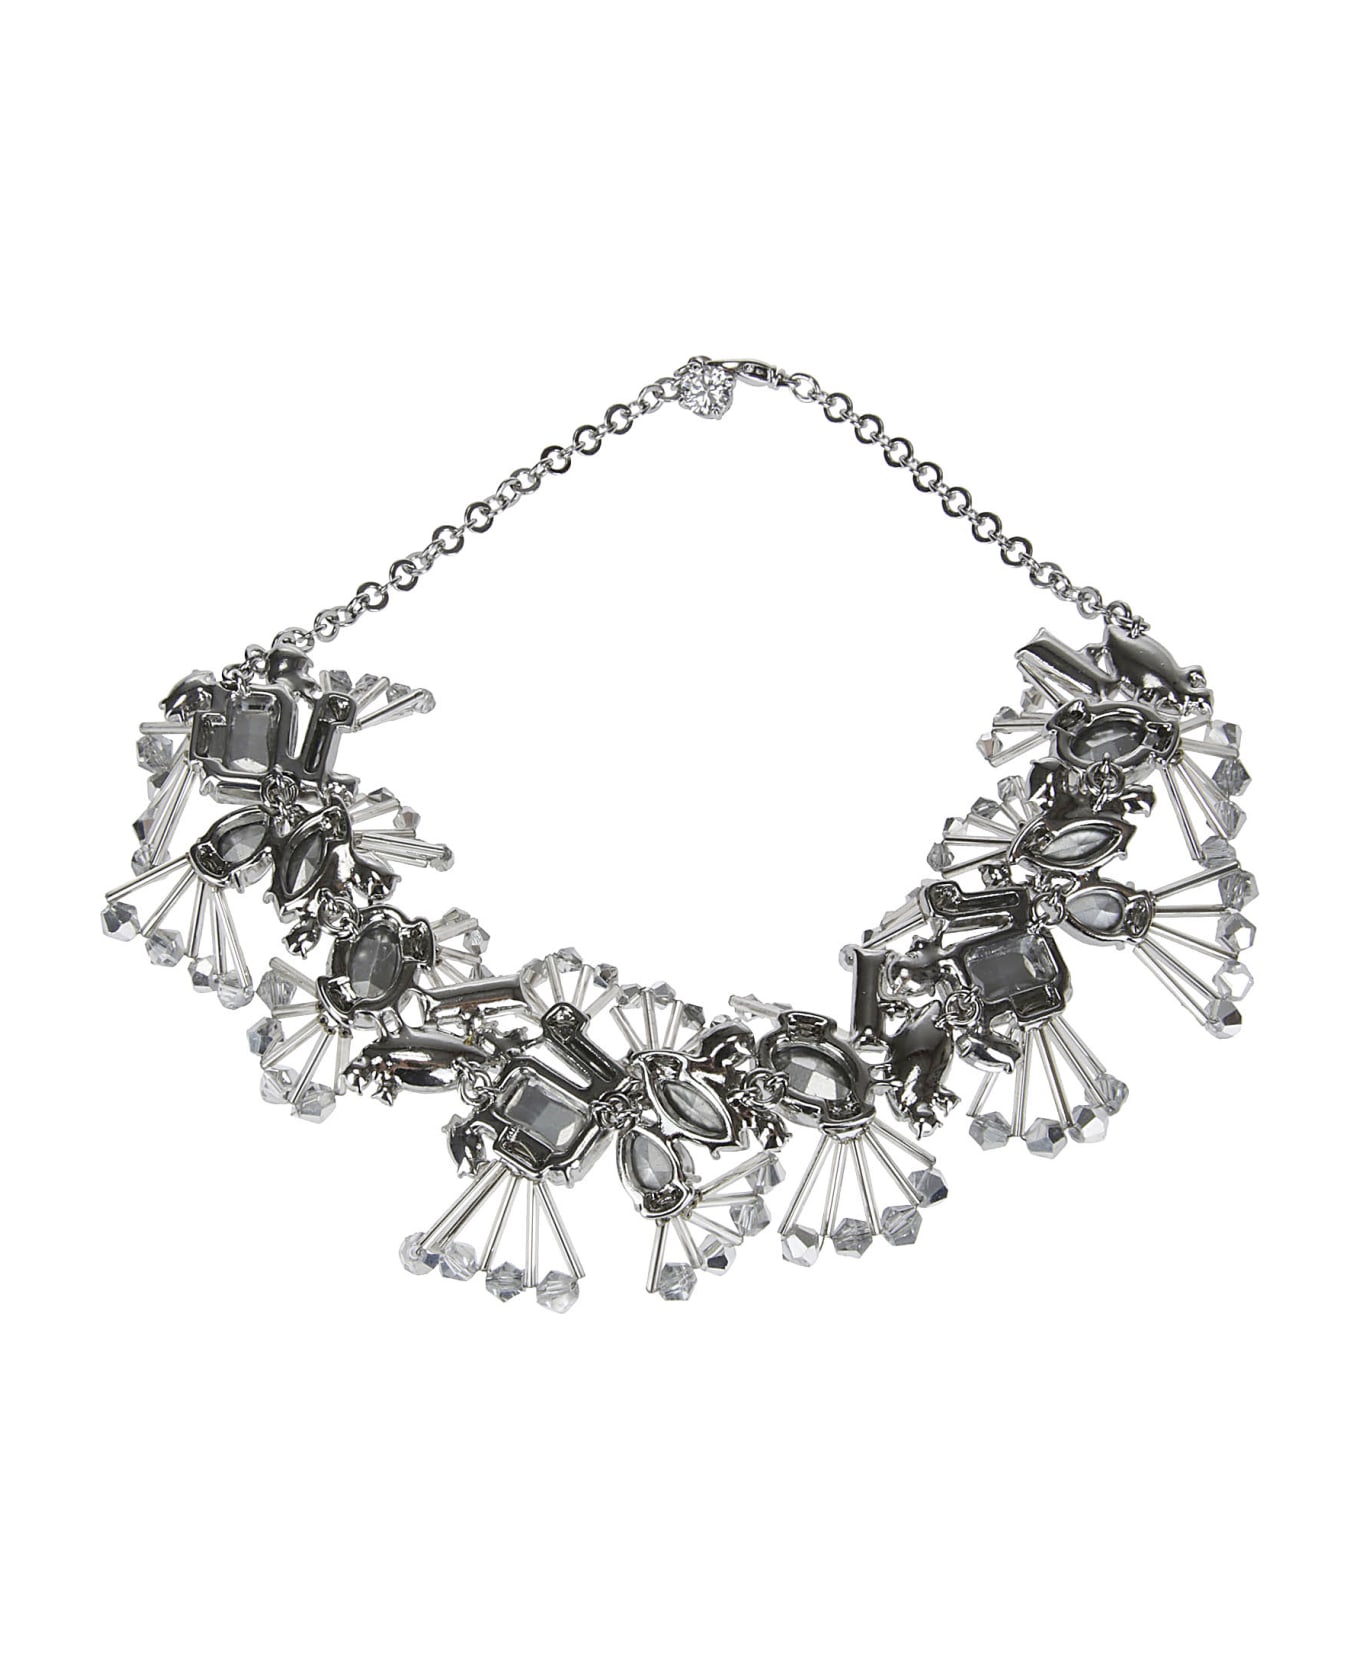 AREA Distressed Crystal Choker - SILVER